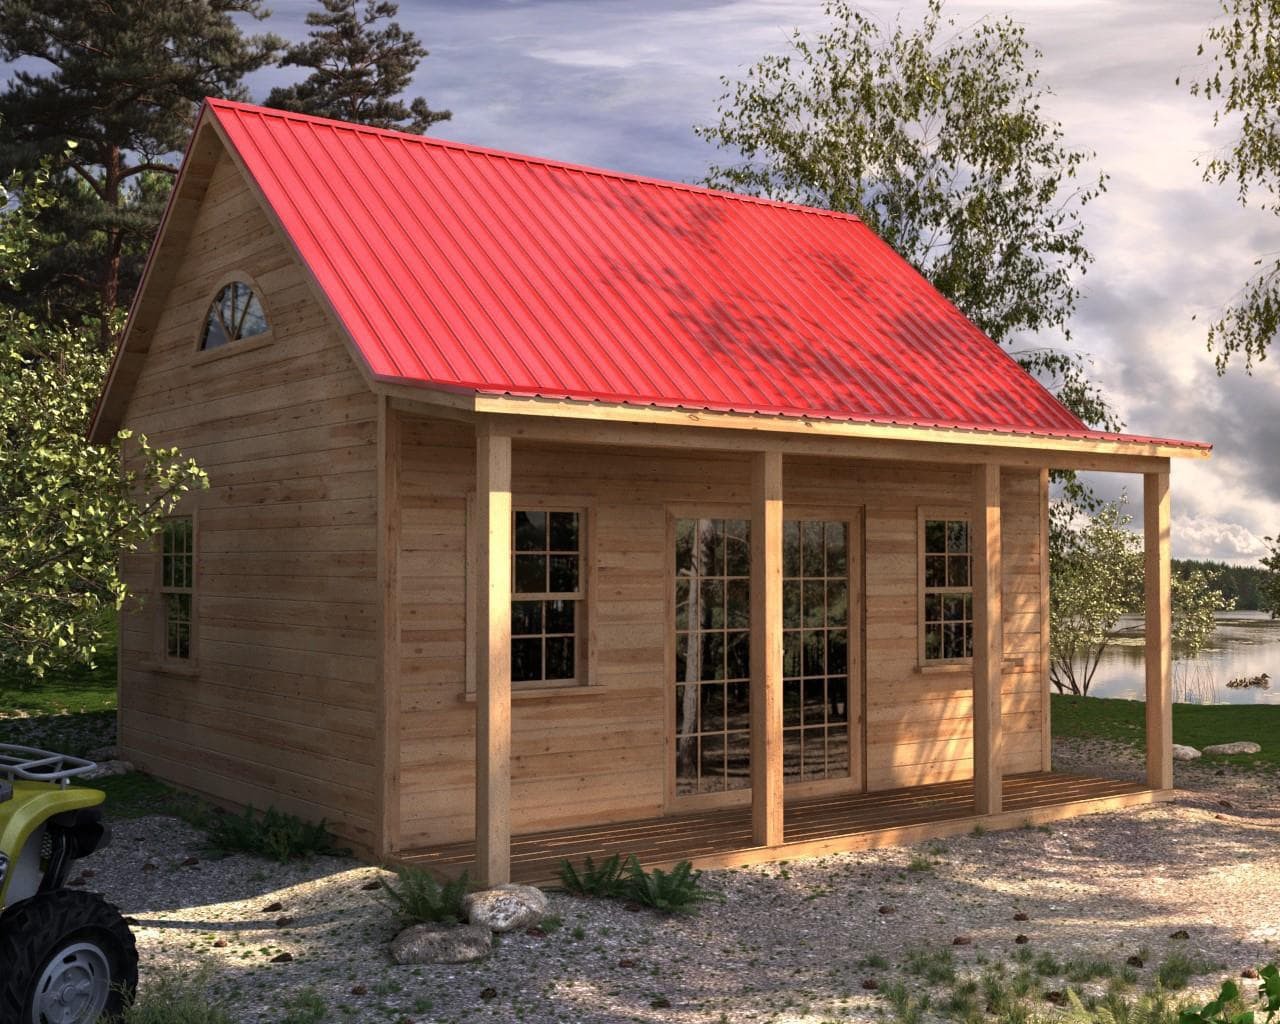 Invermere 16x20 cabin with arch window in Toronto Ontario. ID number 6821-1